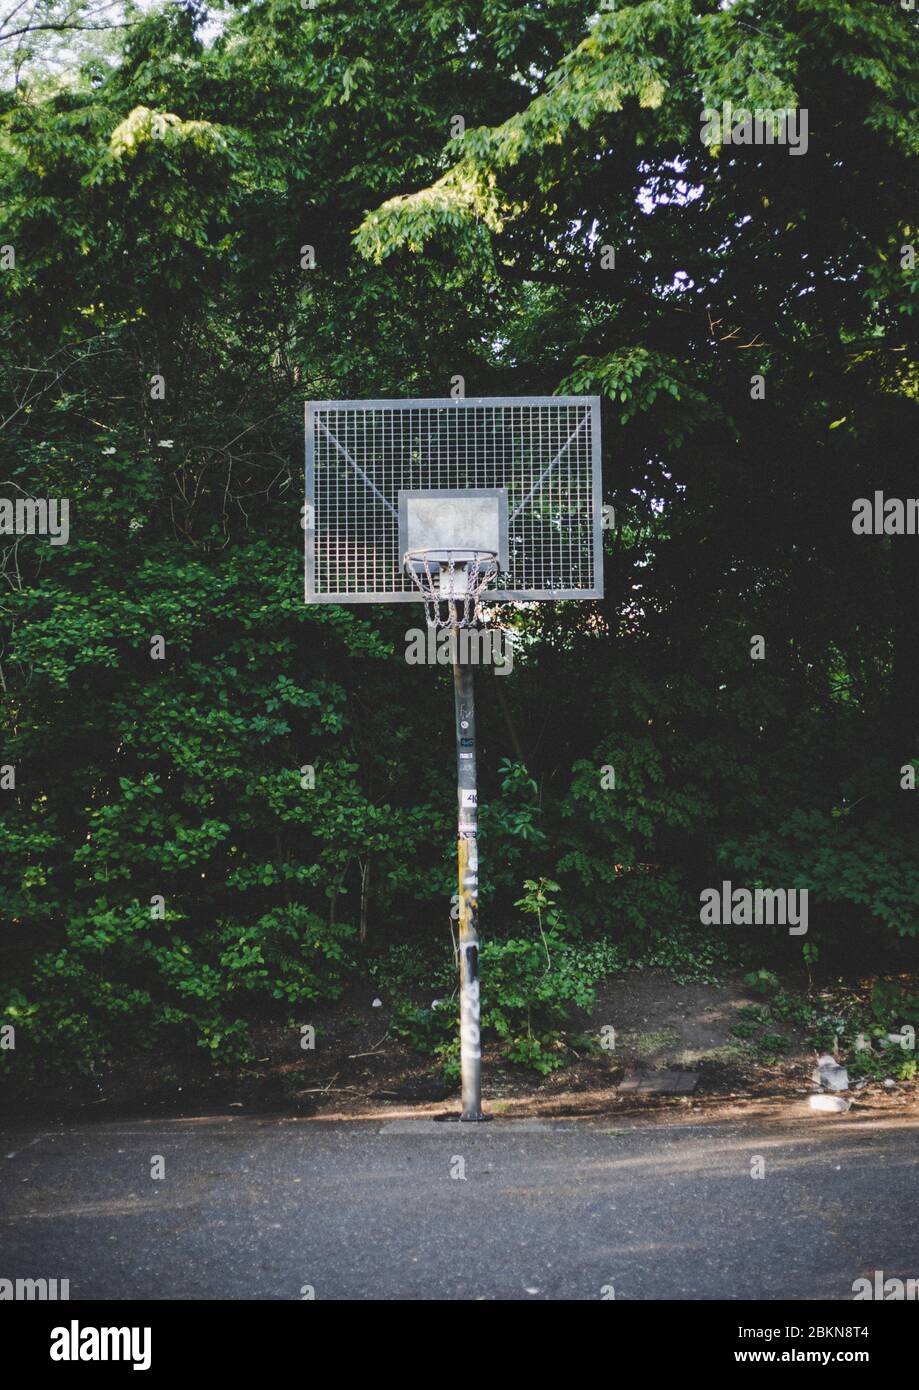 Cologne, Germany, 04.05.2020: Streetbasketball. Stock Photo